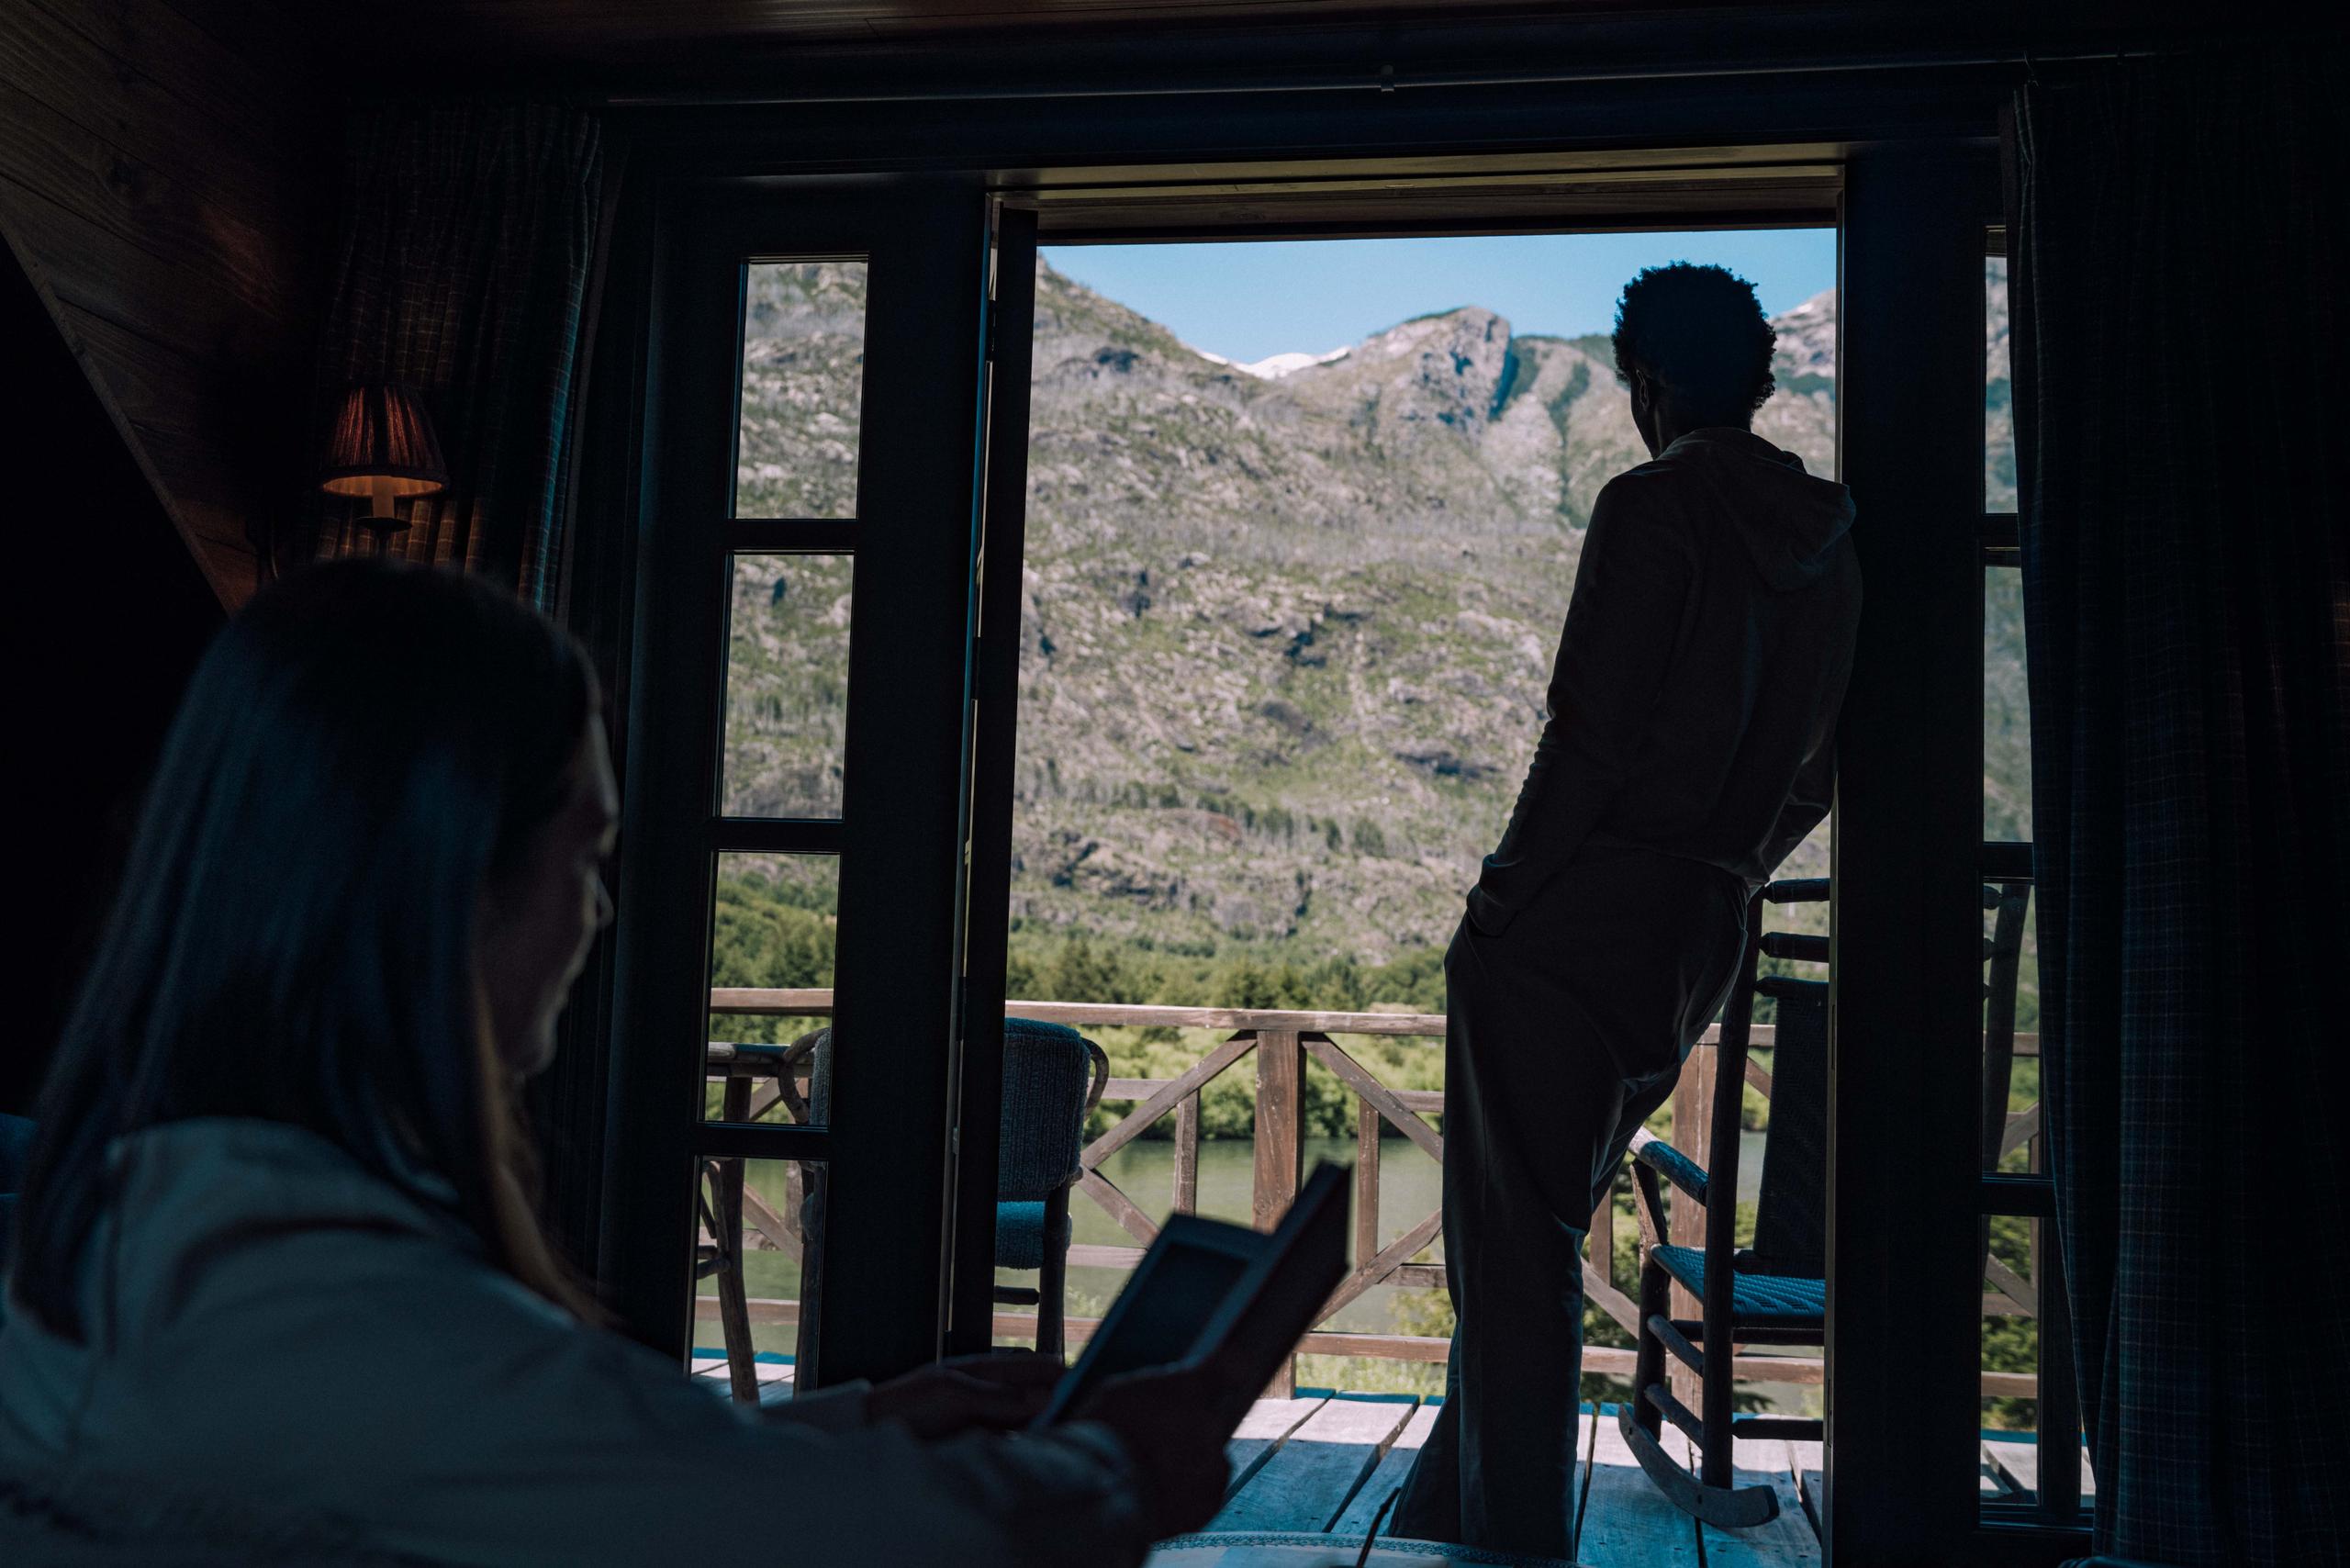 Silhouette of man and woman in lodge overlooking Patagonia mountains